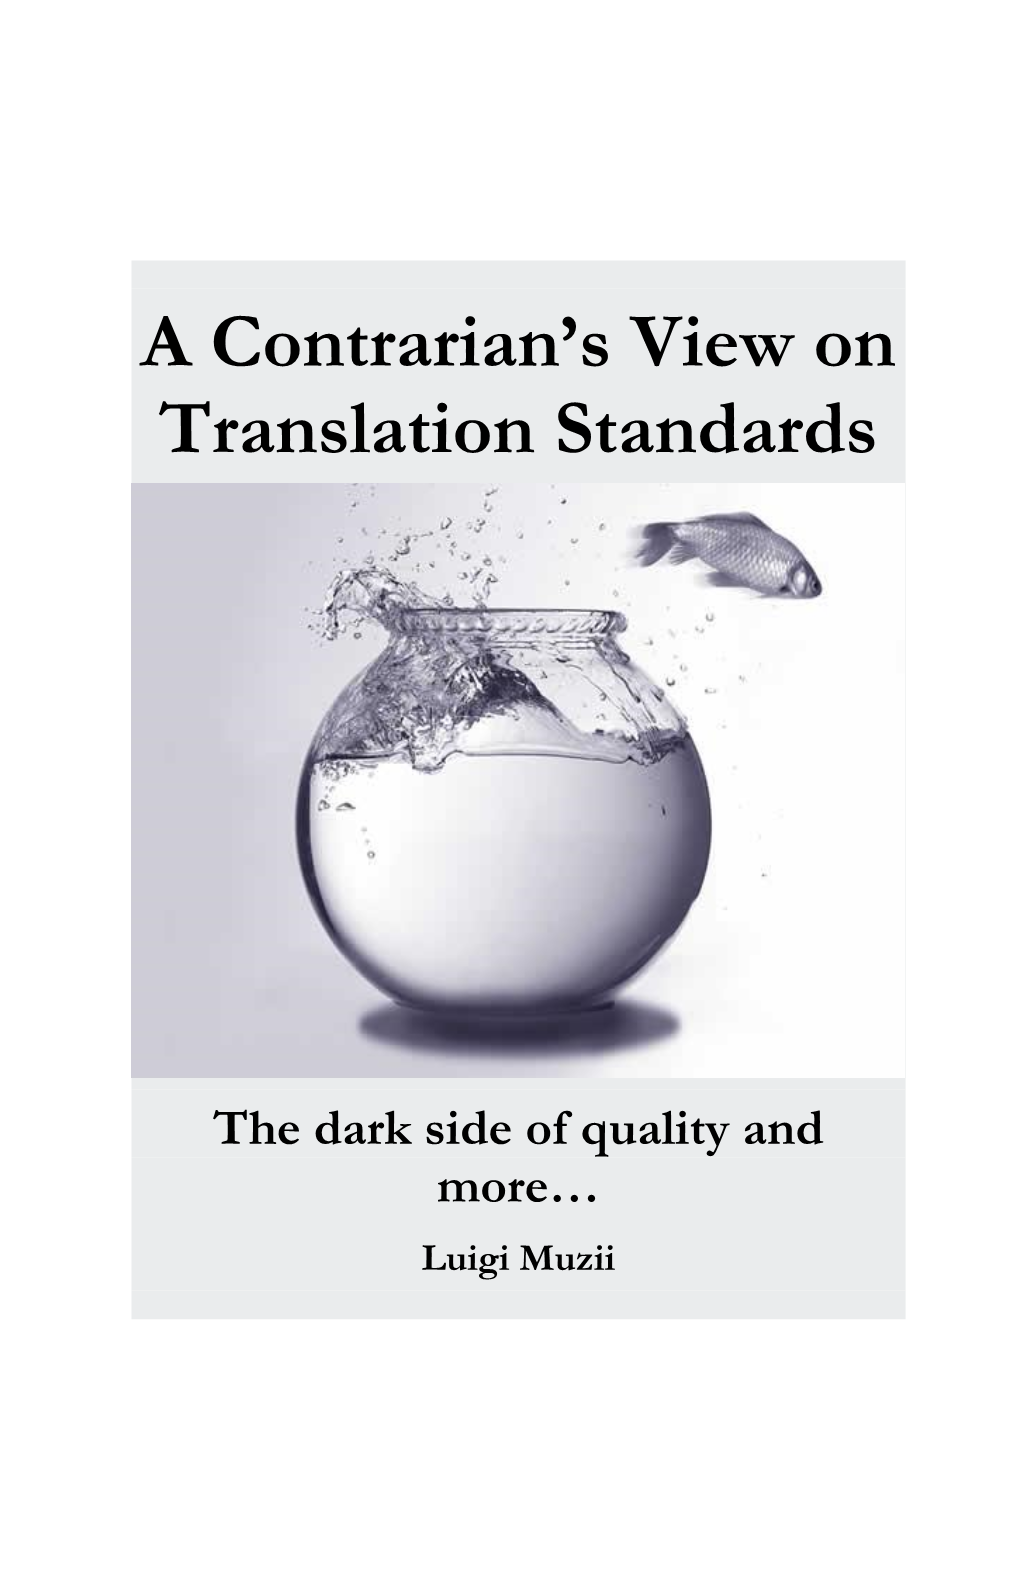 A Contrarian's View on Translation Standards